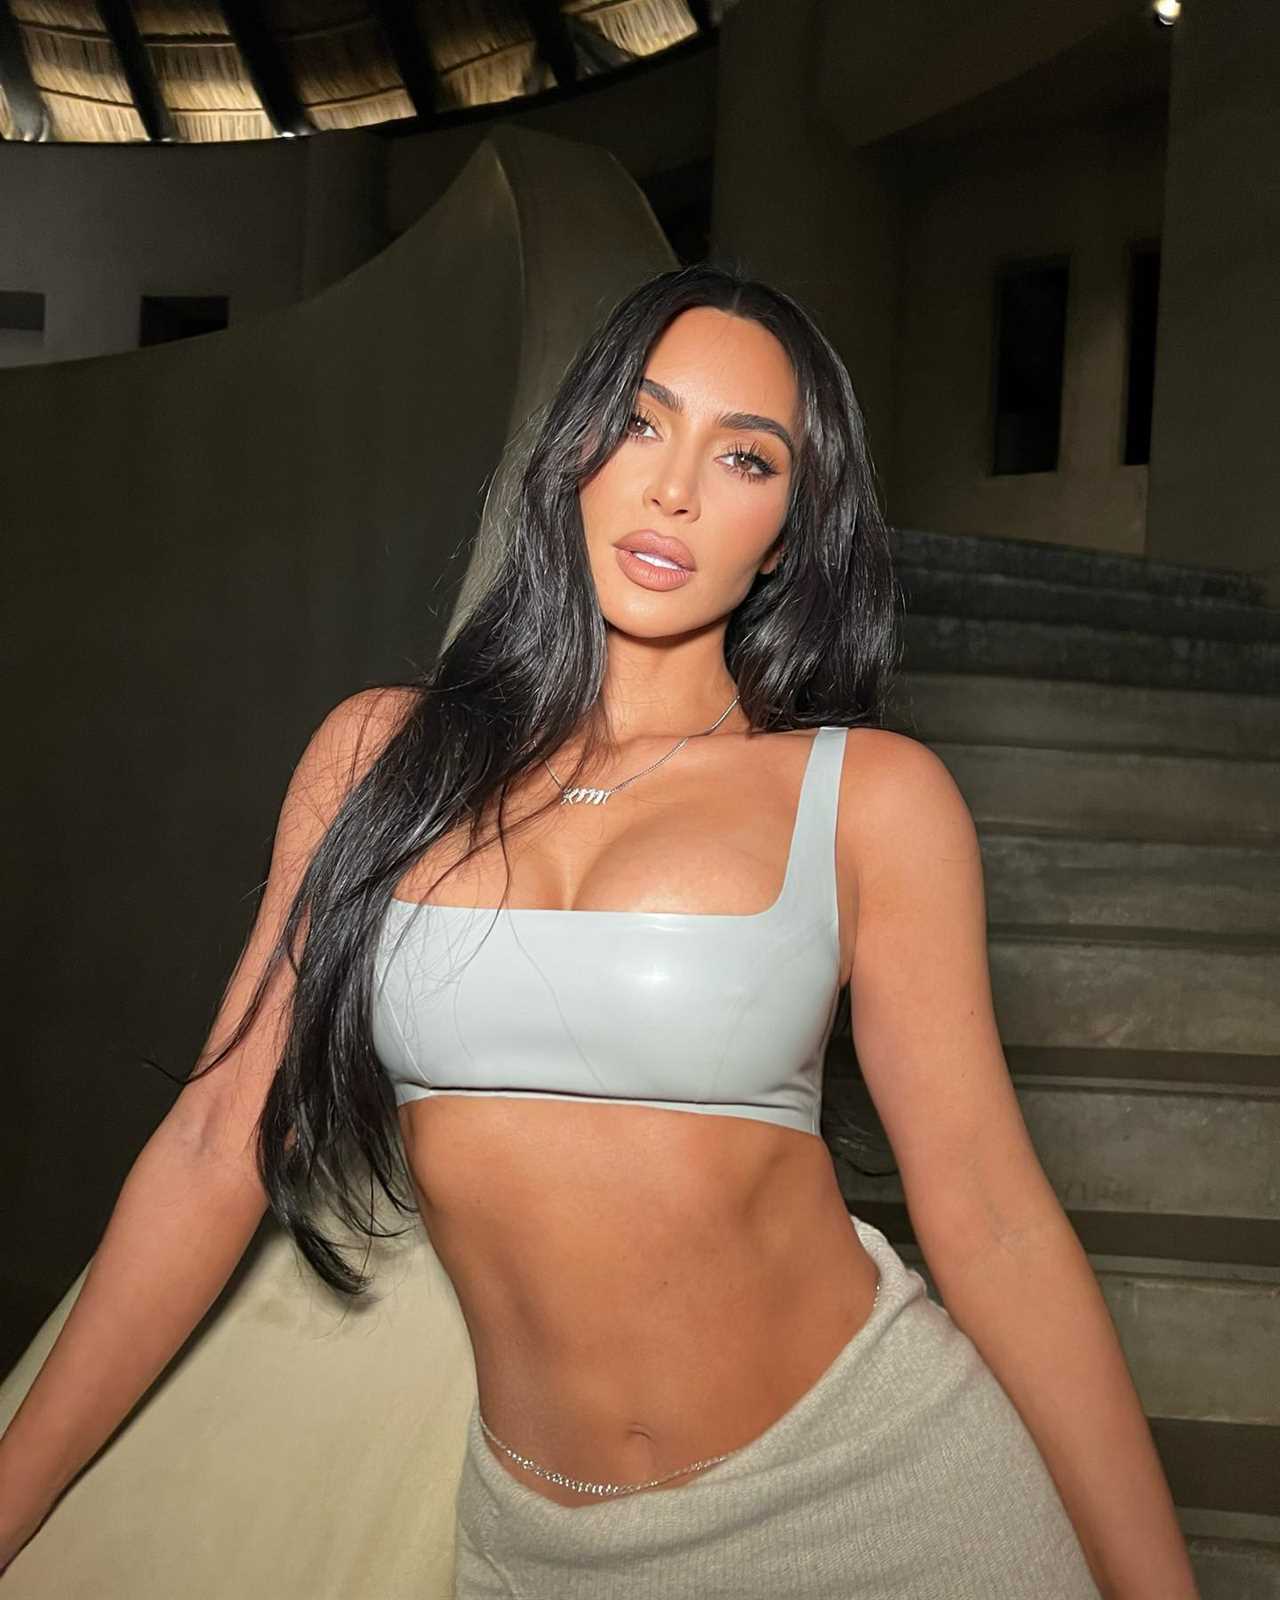 Kim Kardashian shows off her curves in see-through lace dress for sexy pic after fans claim she got ‘secret procedure’